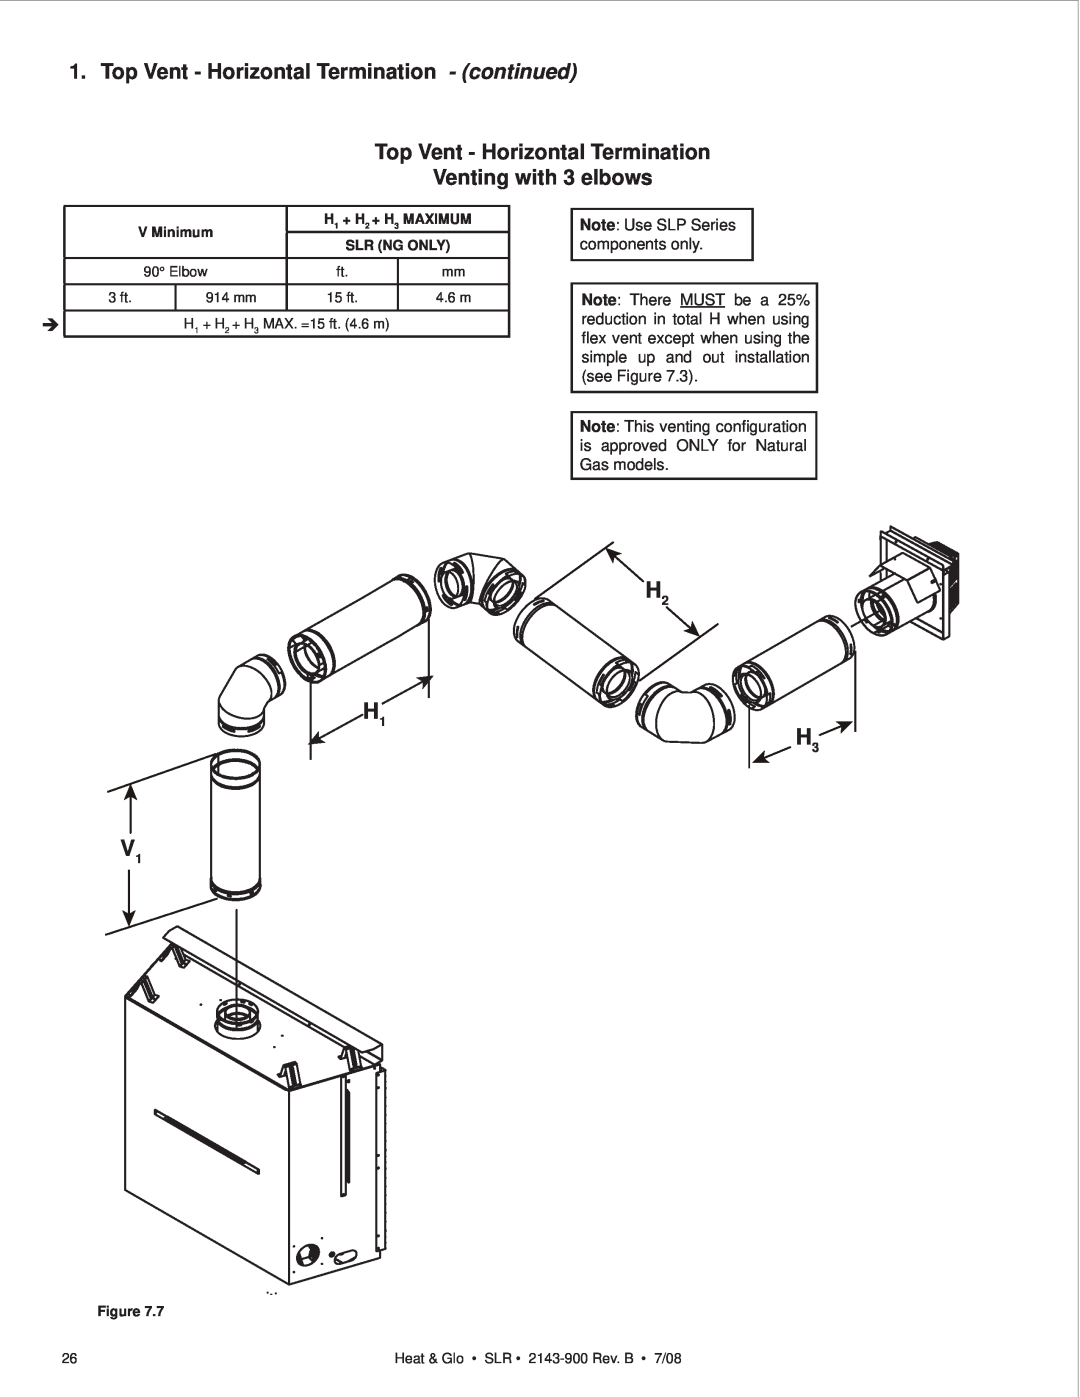 Heat & Glo LifeStyle SLR (COSMO) owner manual H1 V1, Venting with 3 elbows, Top Vent - Horizontal Termination - continued 